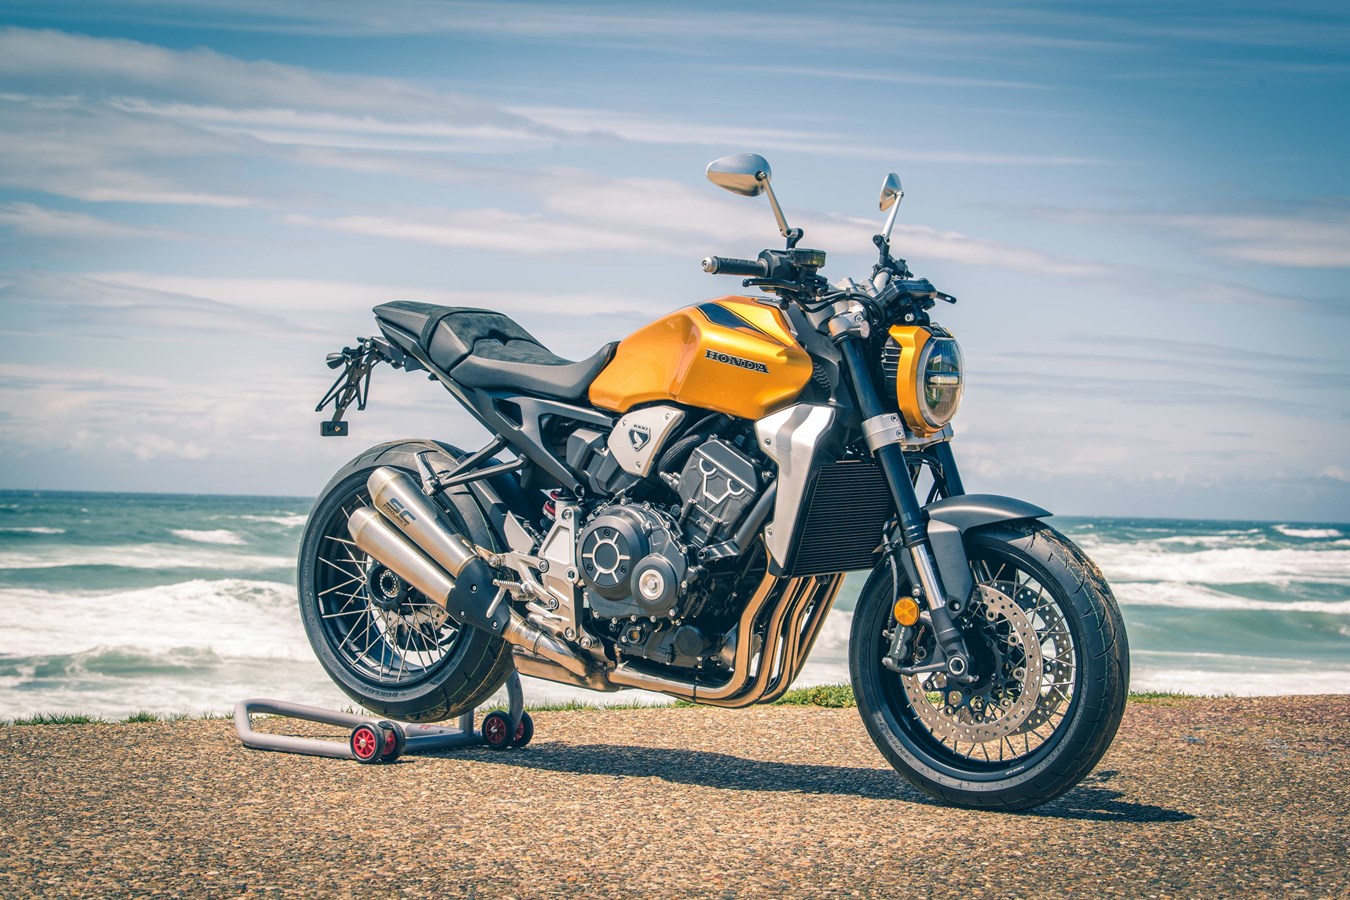 A dozen customized CB1000R's at Wheels and Waves 2019